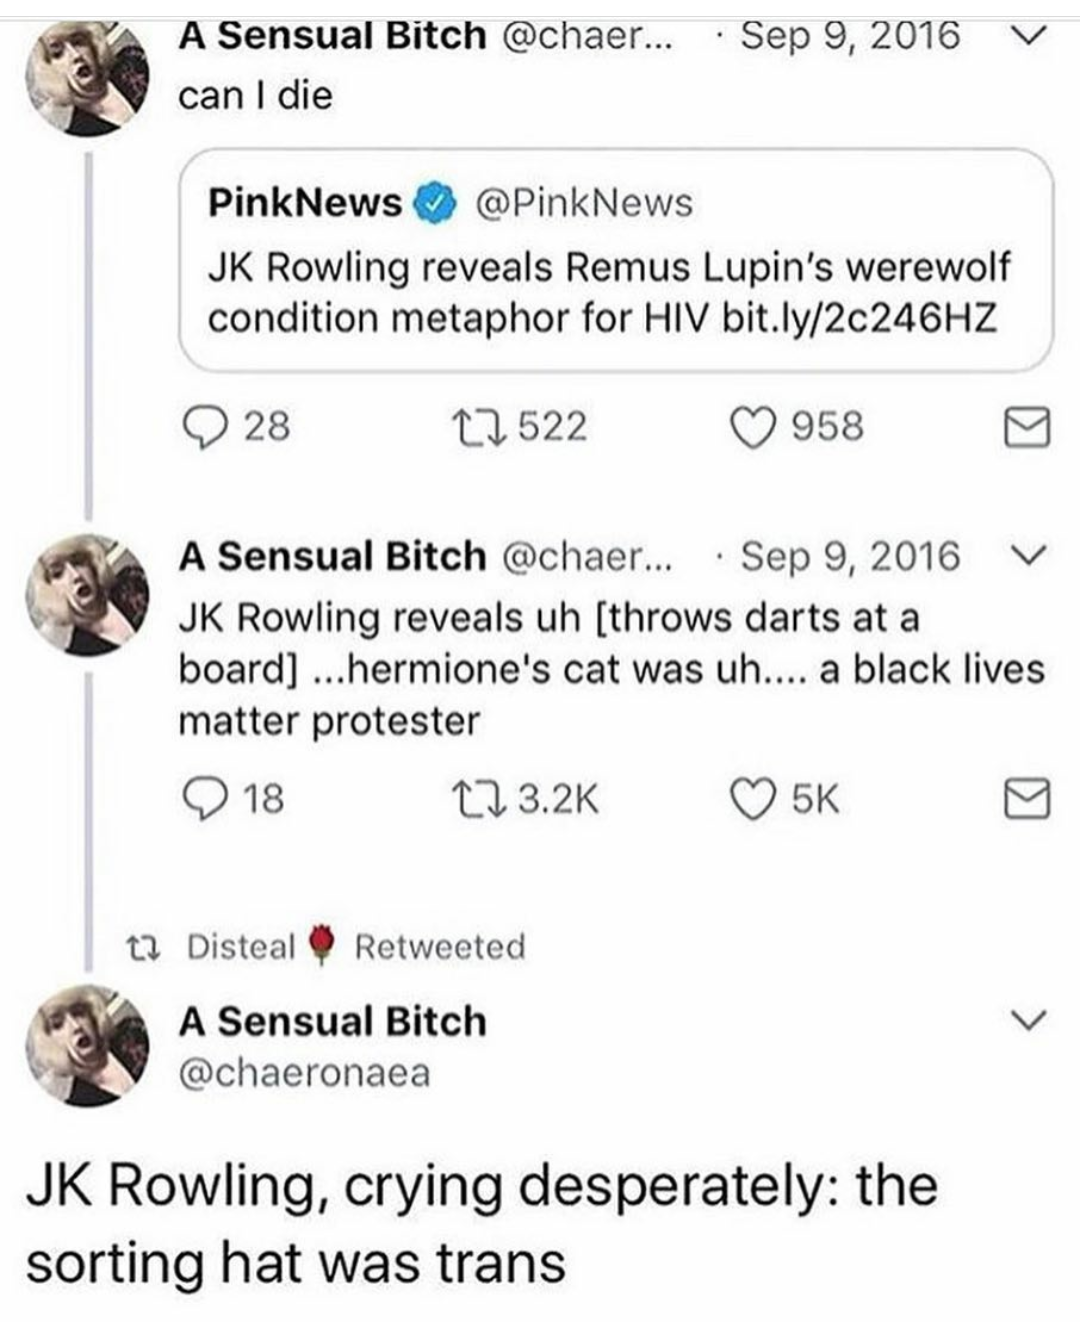 jk rowling meme - v A Sensual Bitch ... can I die PinkNews Jk Rowling reveals Remus Lupin's werewolf condition metaphor for Hiv bit.ly2c246HZ 28 12522 958 A Sensual Bitch ... Jk Rowling reveals uh throws darts at a board ...hermione's cat was uh.... a bla